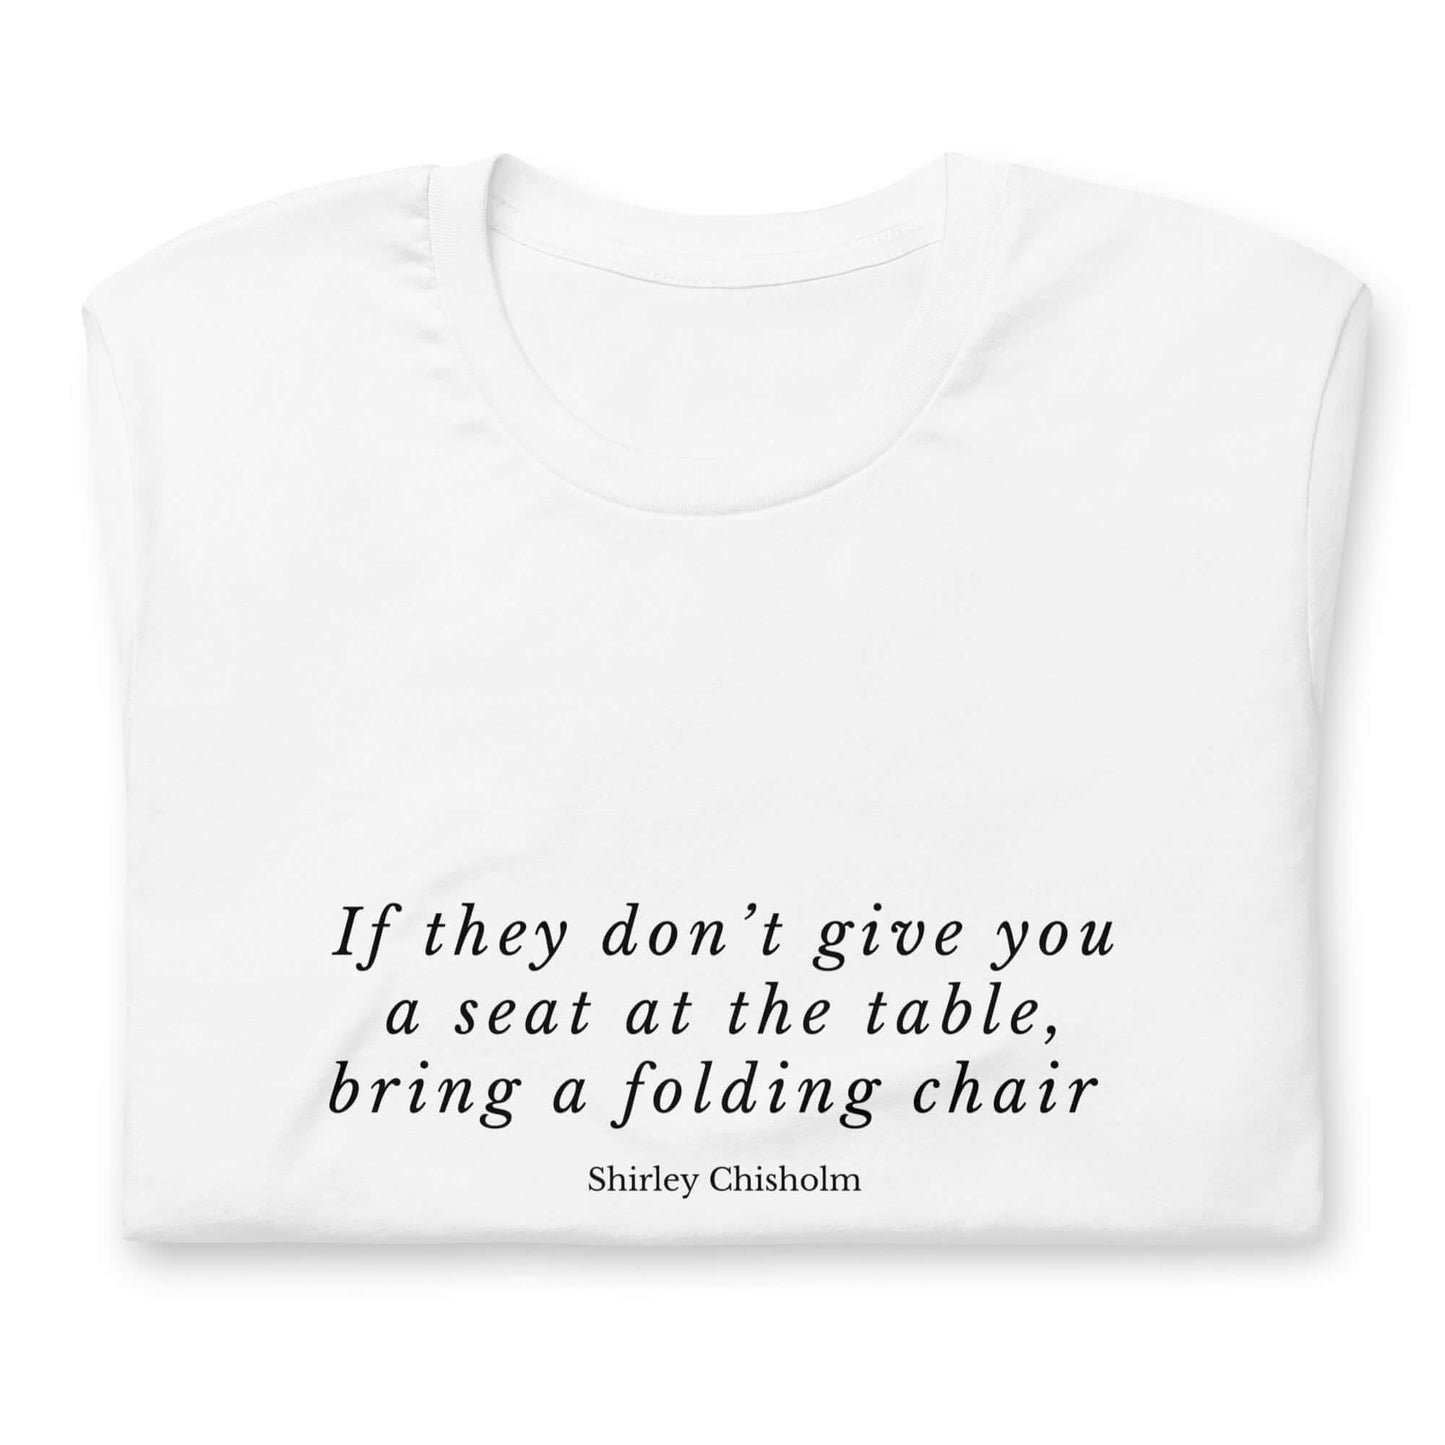 If They Don't Give You a Seat at the Table, Bring a Folding Chair Shirley Chisholm T-Shirt - Bad Perfectionist Co.